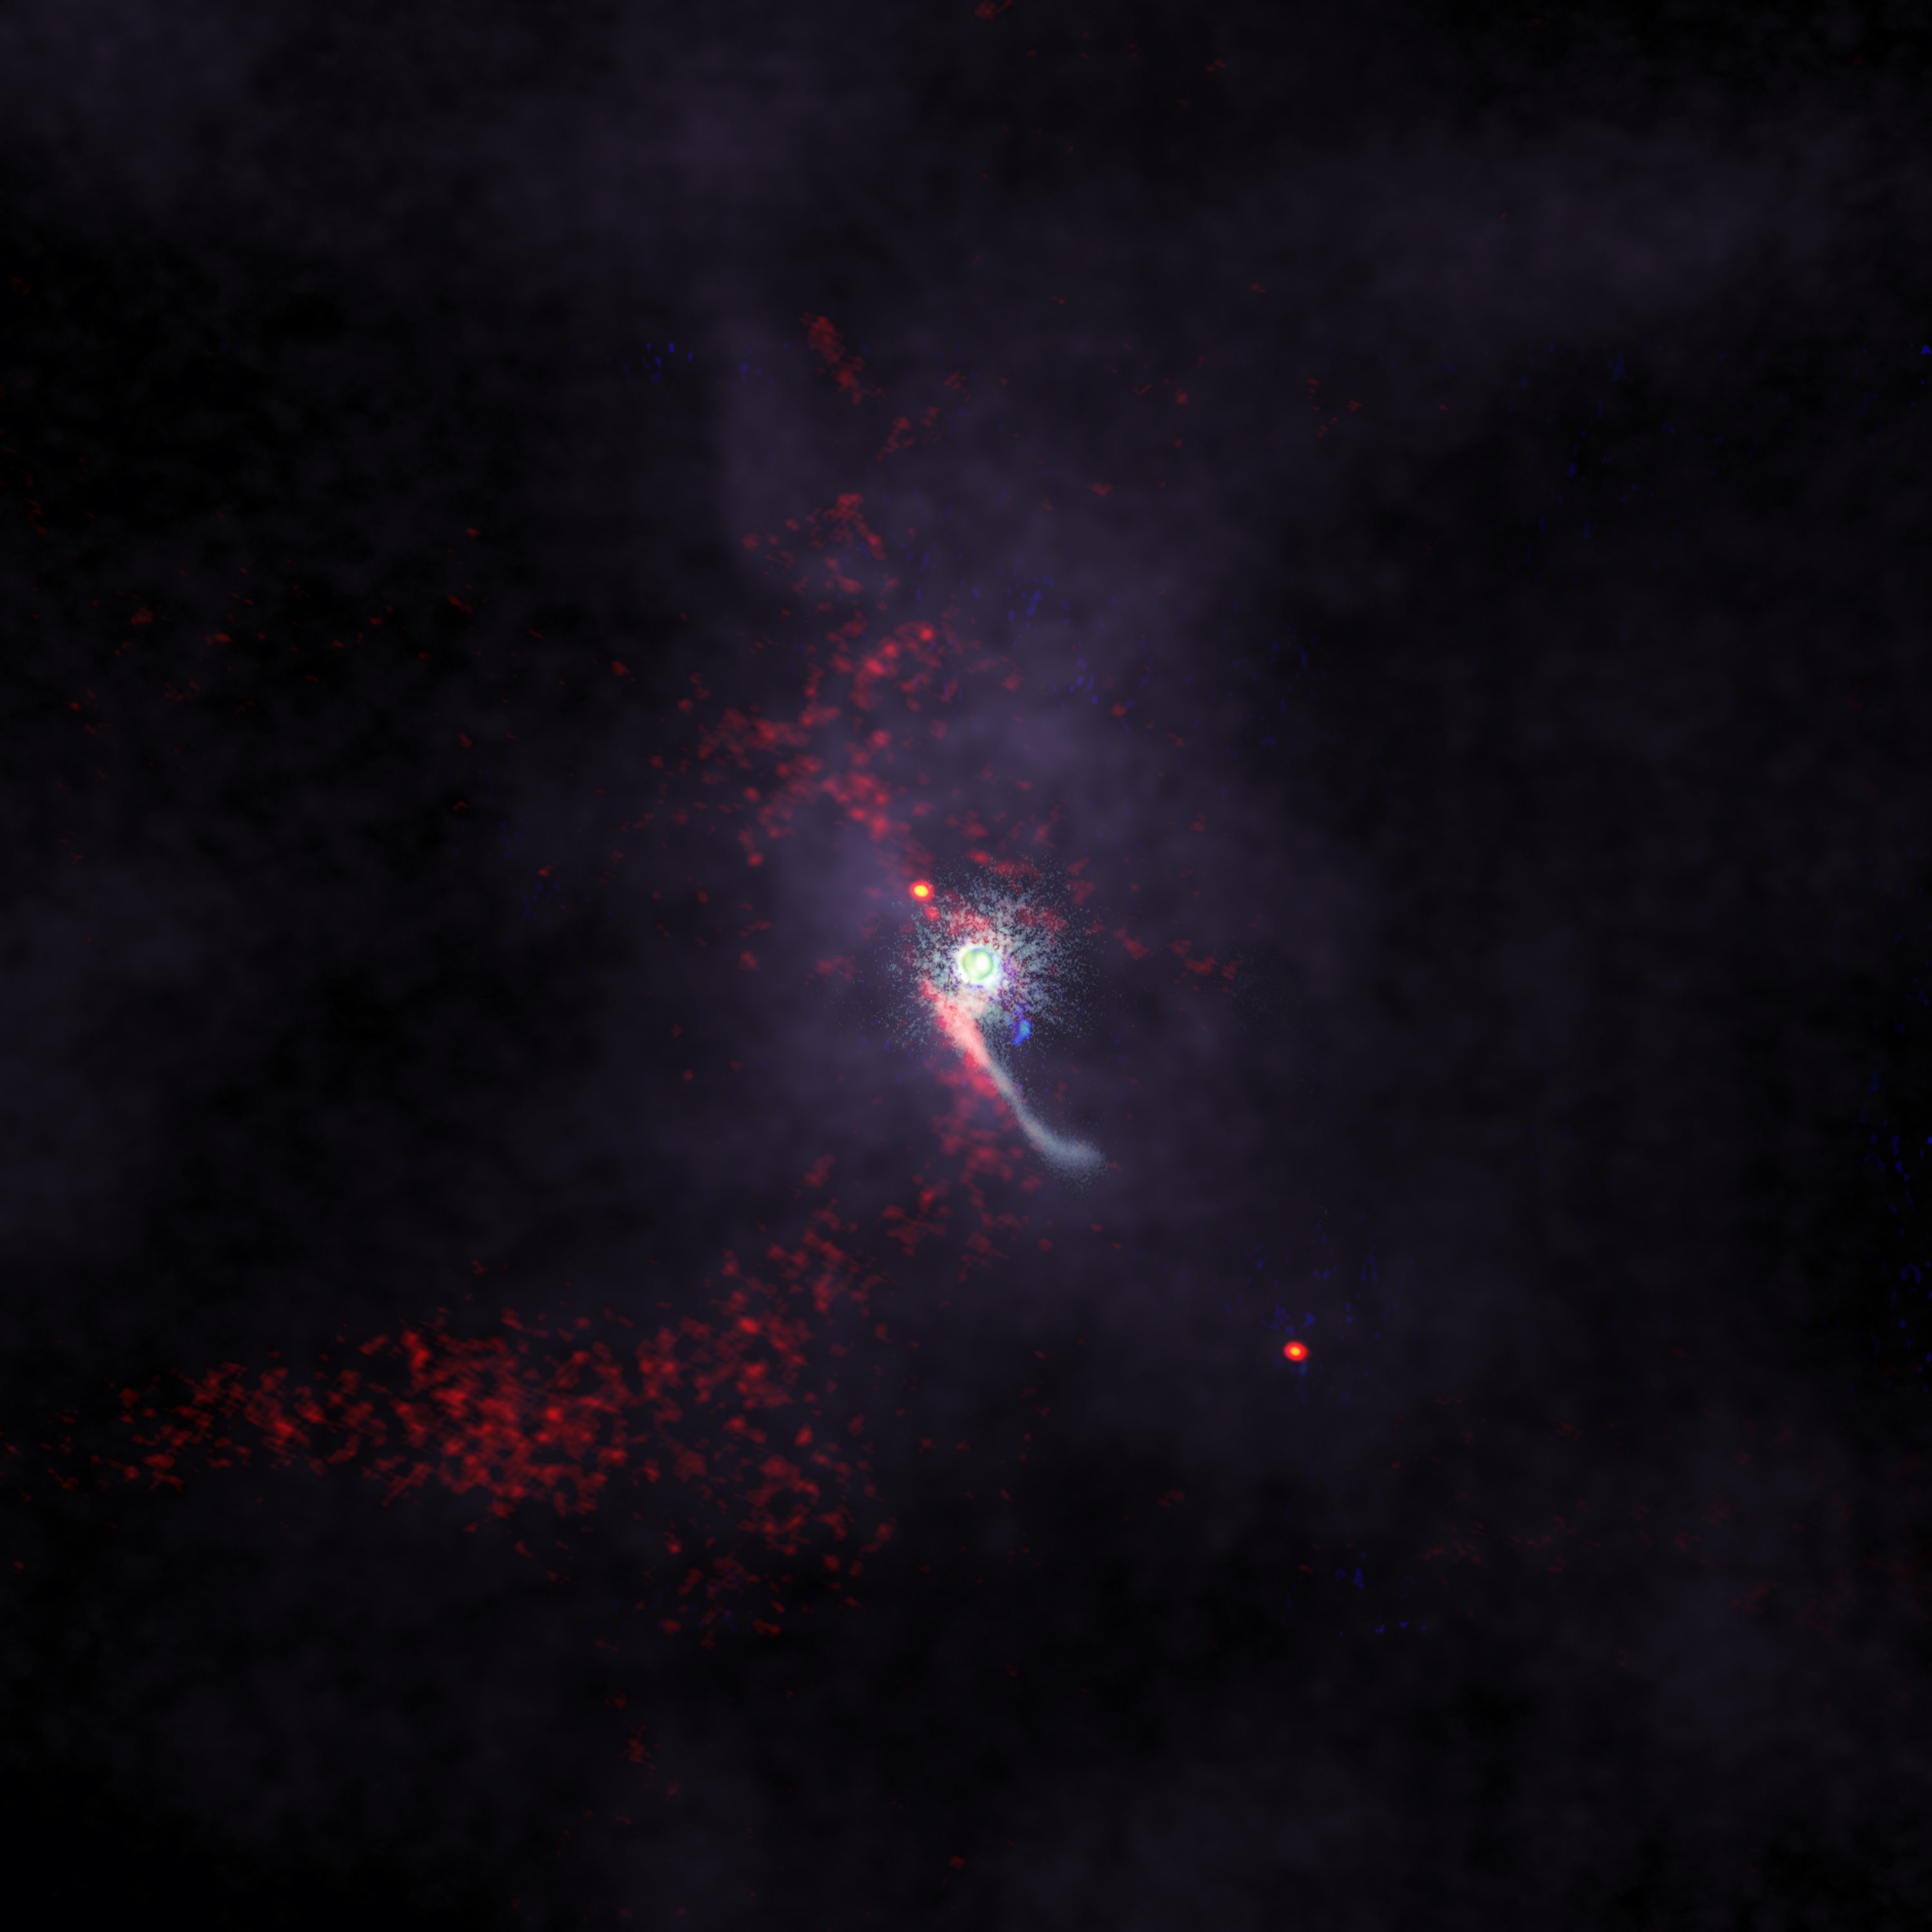 Scientists have made the first comprehensive multi-wavelength observational study of an intruder object disturbing the protoplanetary disk—or birthplace of planets—surrounding the Z Canis Majoris star (Z CMa) in the constellation Canis Major. This composite image includes data from the Subaru Telescope, Jansky Very Large Array, and the Atacama Large Millimeter/submillimeter Array, revealing in detail the perturbations, including long streams of material, made in Z CMa’s protoplanetary disk by the intruding object. Credit: ALMA (ESO/NAOJ/NRAO), S. Dagnello (NRAO/AUI/NSF), NAOJ